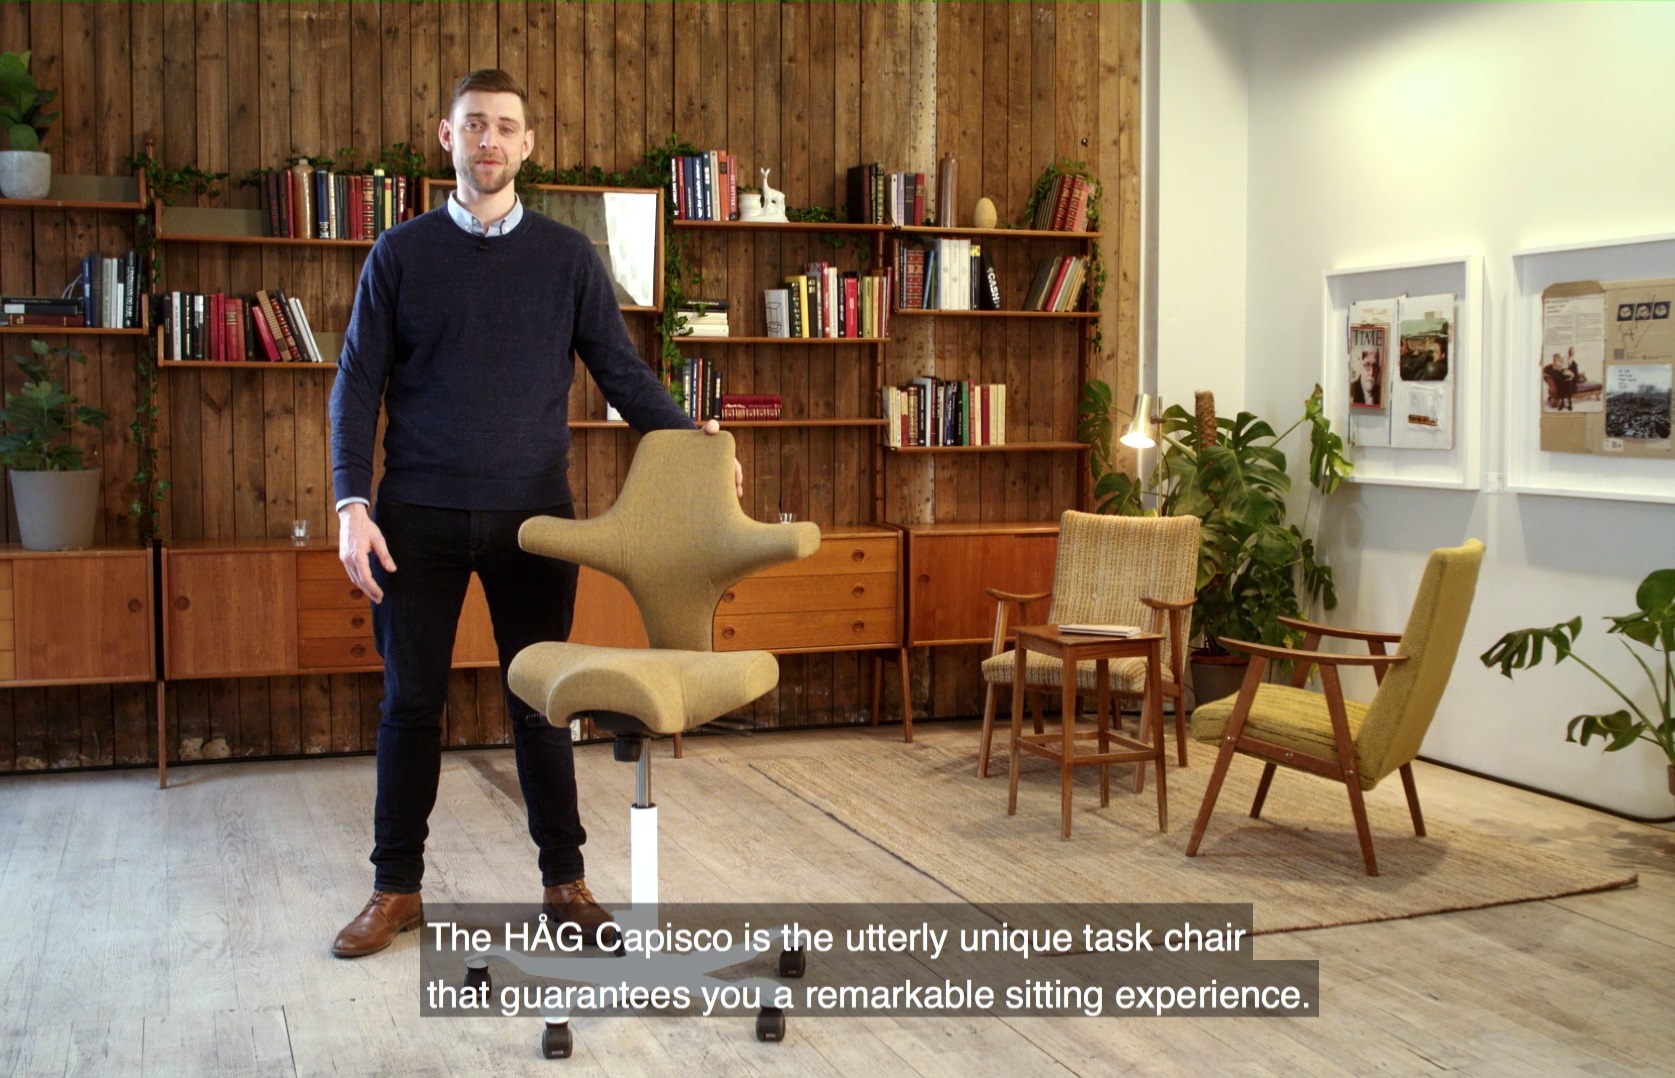 HÅG Capisco video about the qualities of the ergonomical design behind desk chair